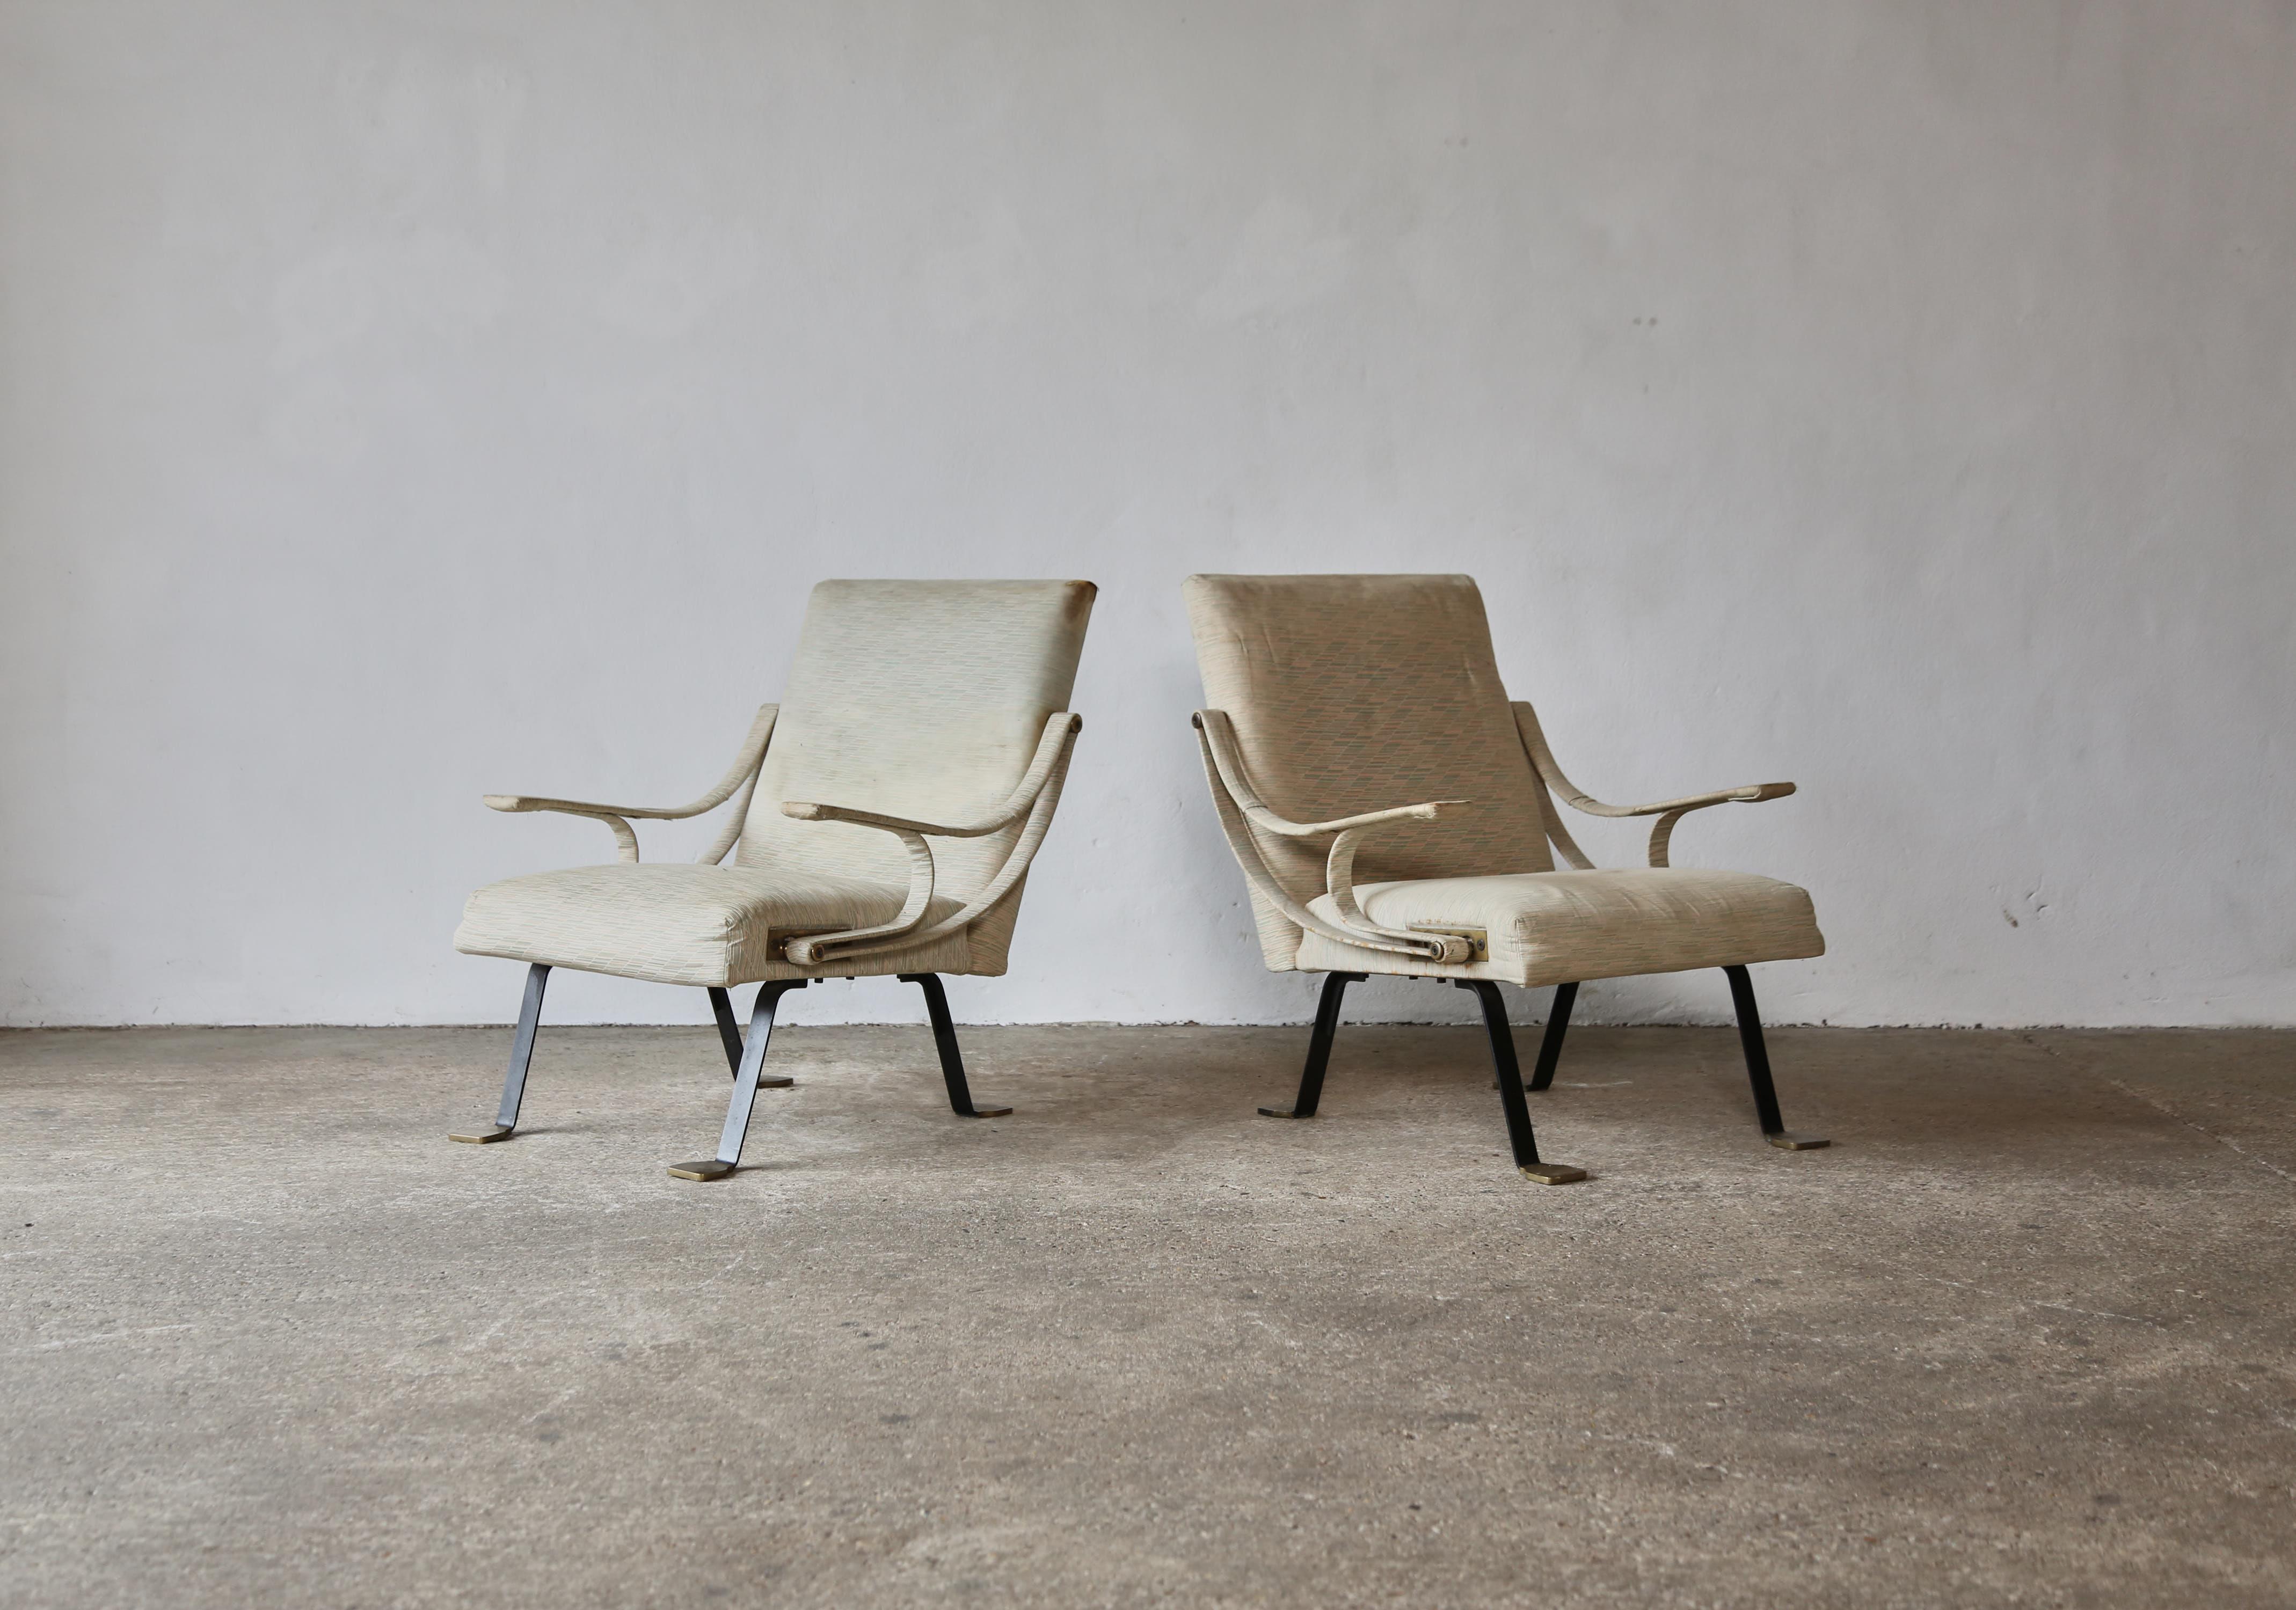 An original, early pair of Ignazio Gardella Reclining Digamma chairs, designed in the late 1950s and produced by Gavina, Italy in the 1960s. In original condition this pair is sold as are for reupholstery.  The metal frames are in good original